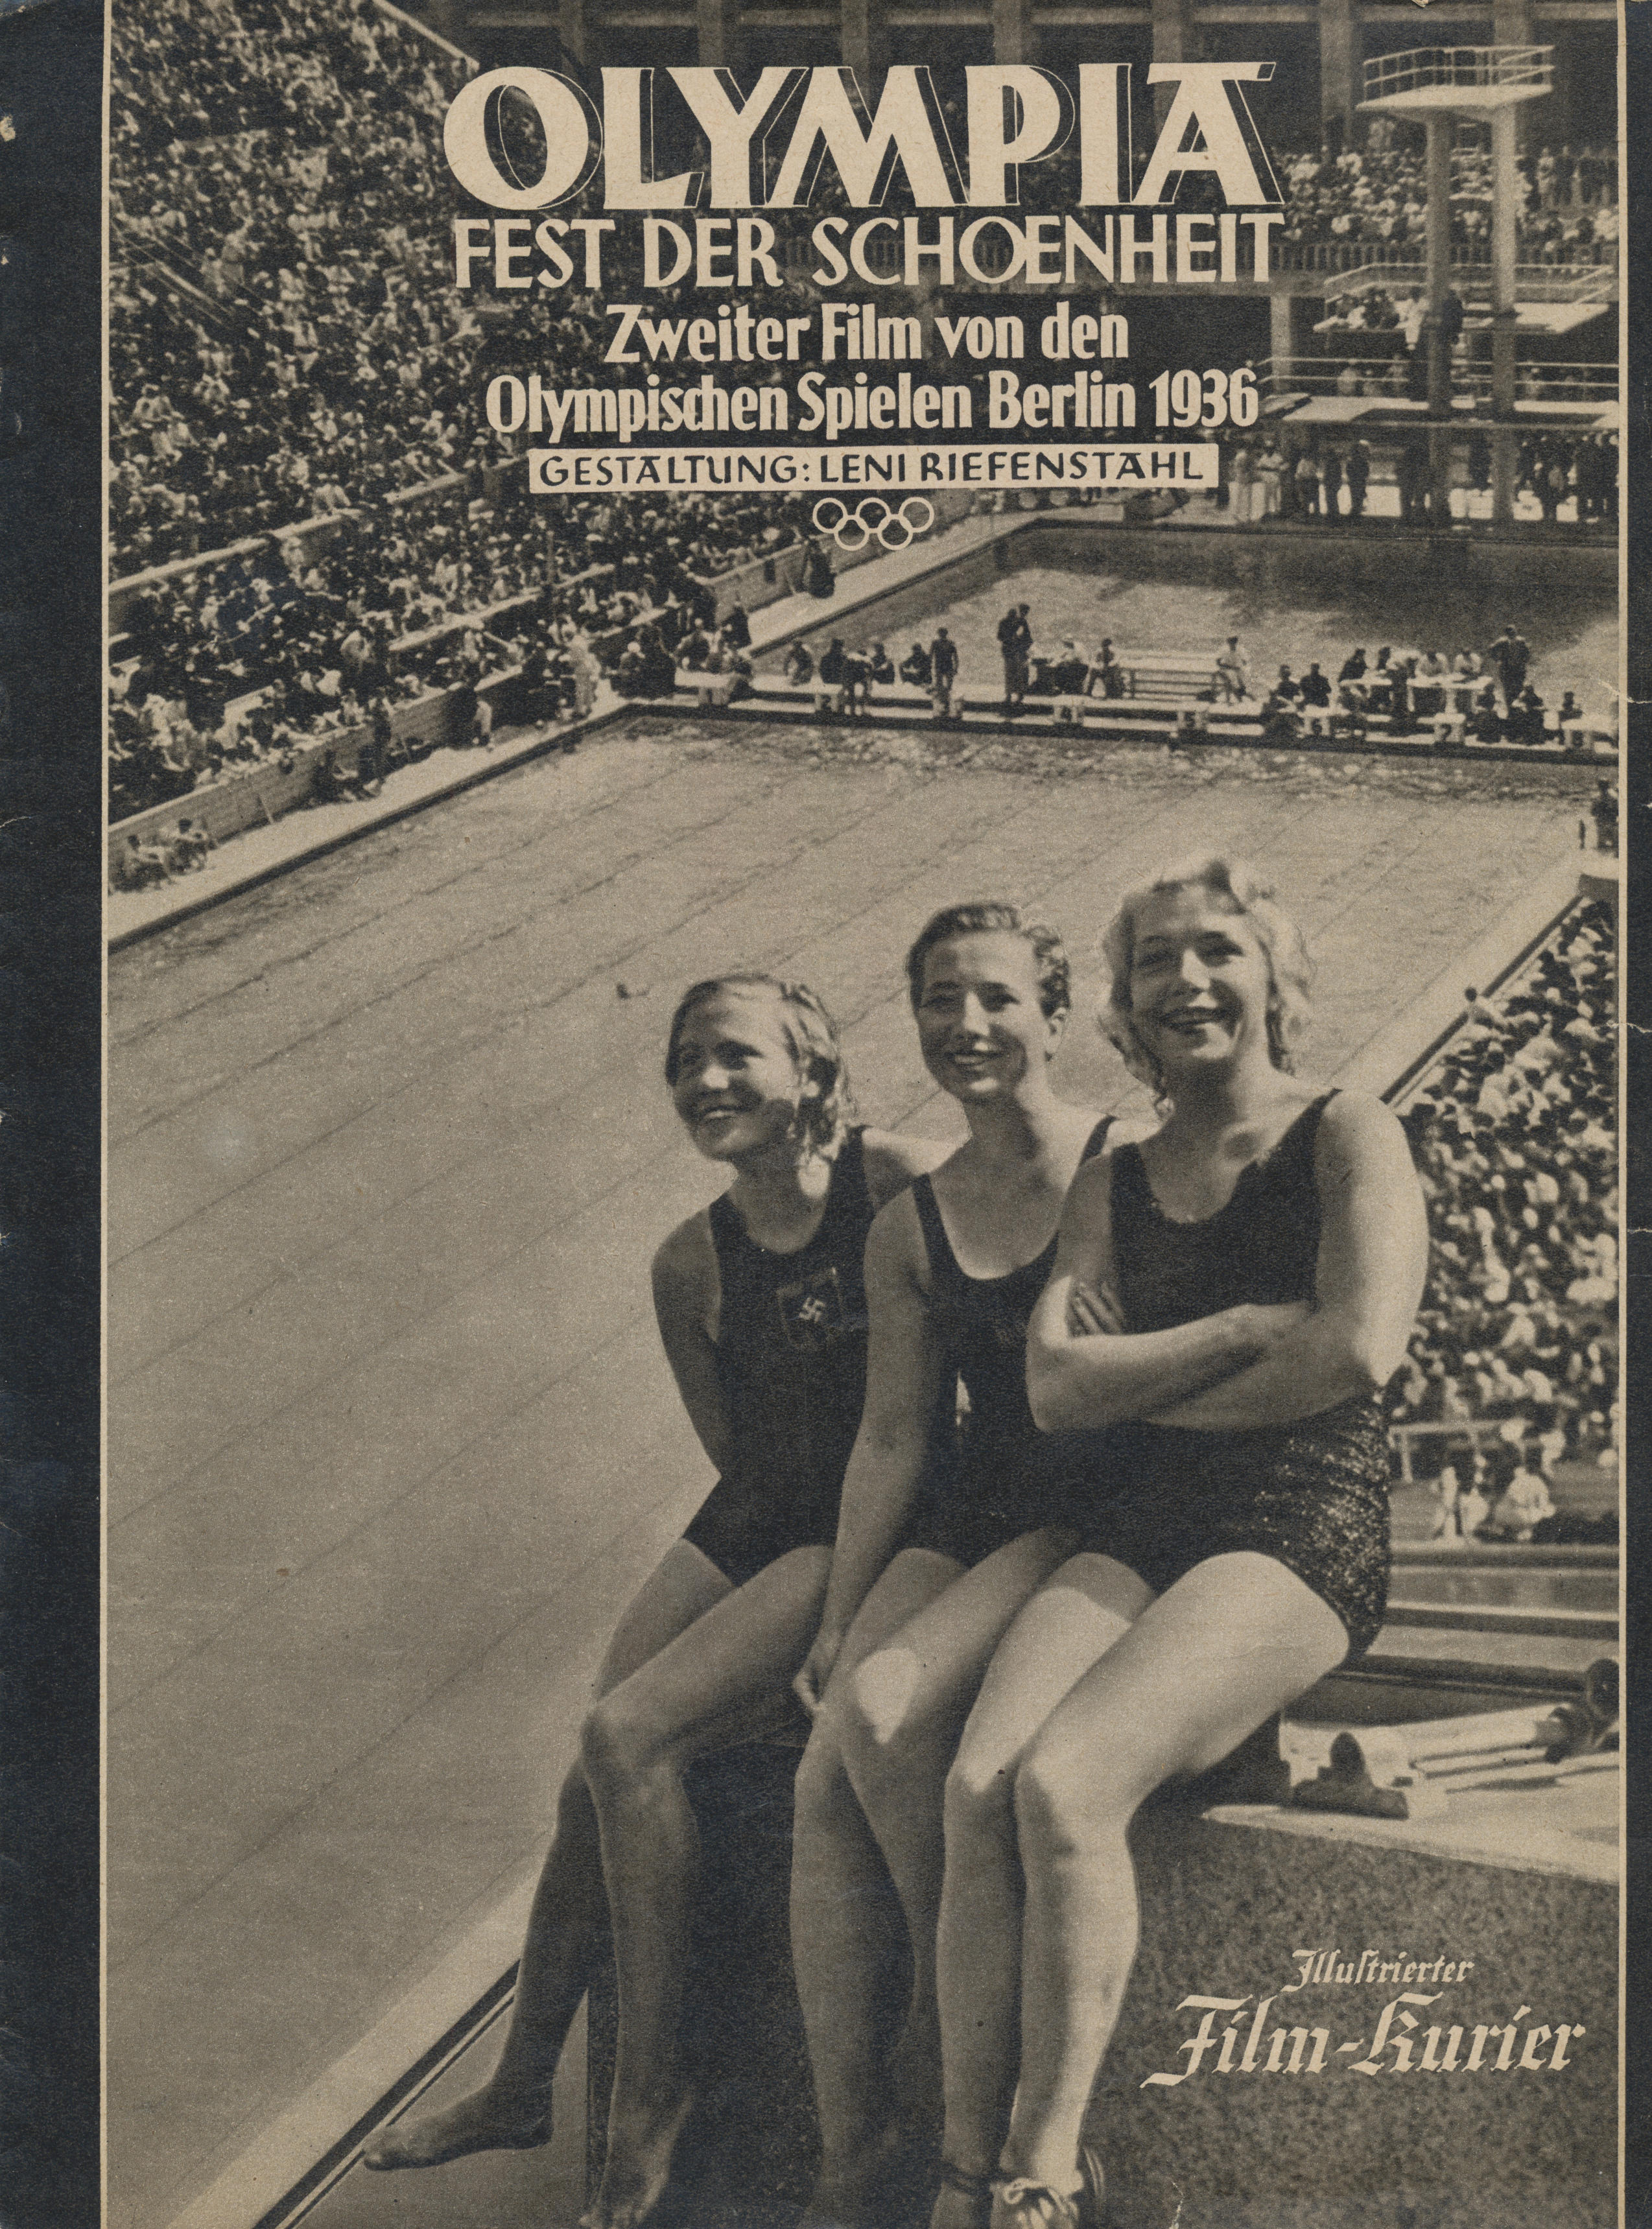 Lot 08390 - thematik: olympische spiele / olympic games  -  Auktionshaus Christoph Gärtner GmbH & Co. KG 55th AUCTION - Day 4